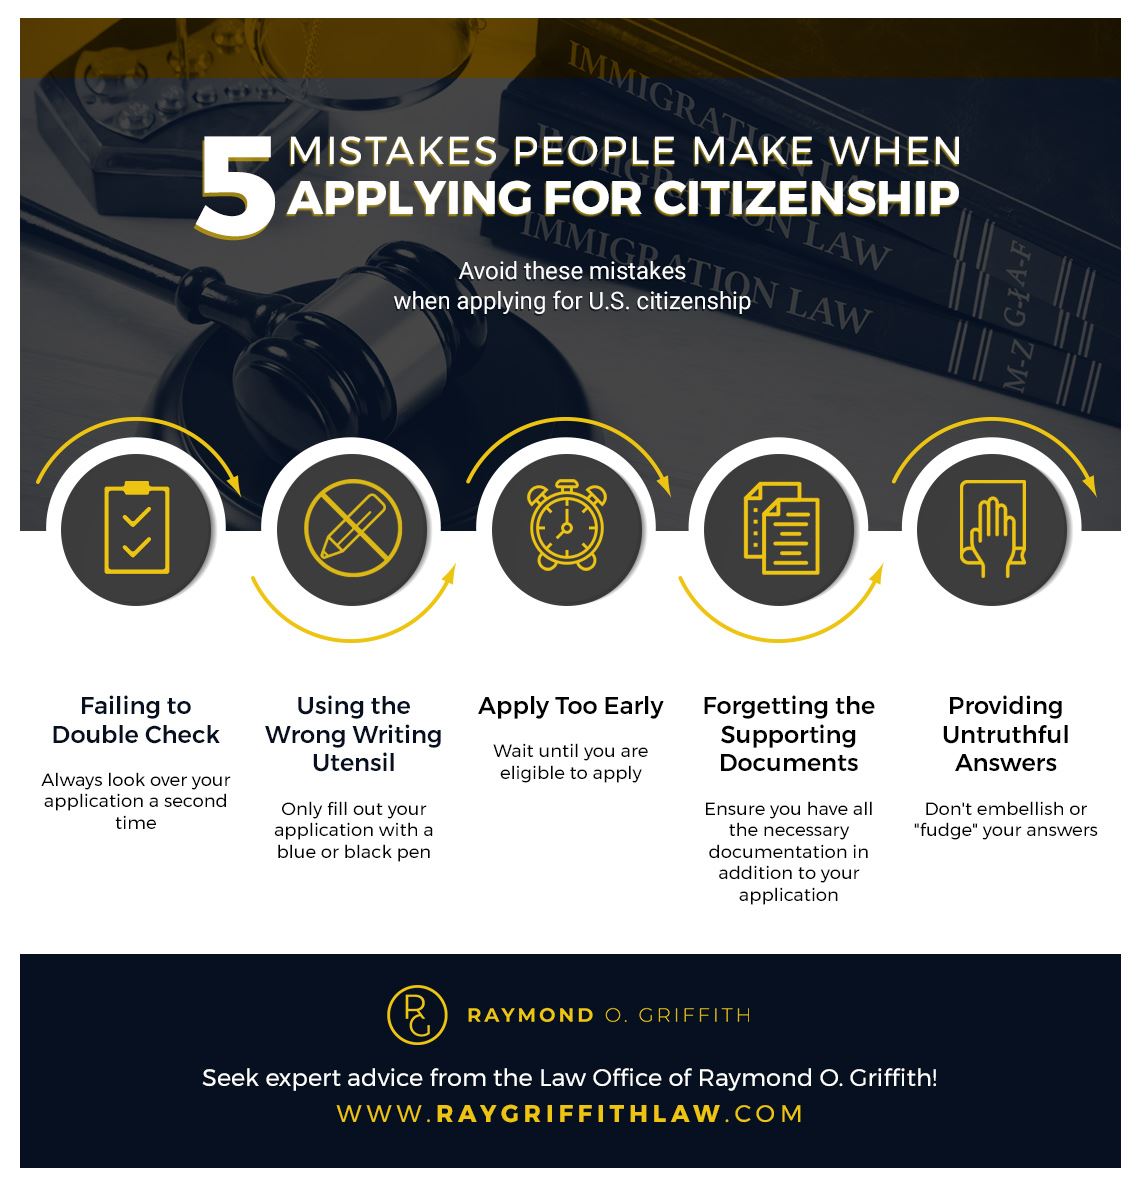 5 Mistakes When Applying For Citizenship